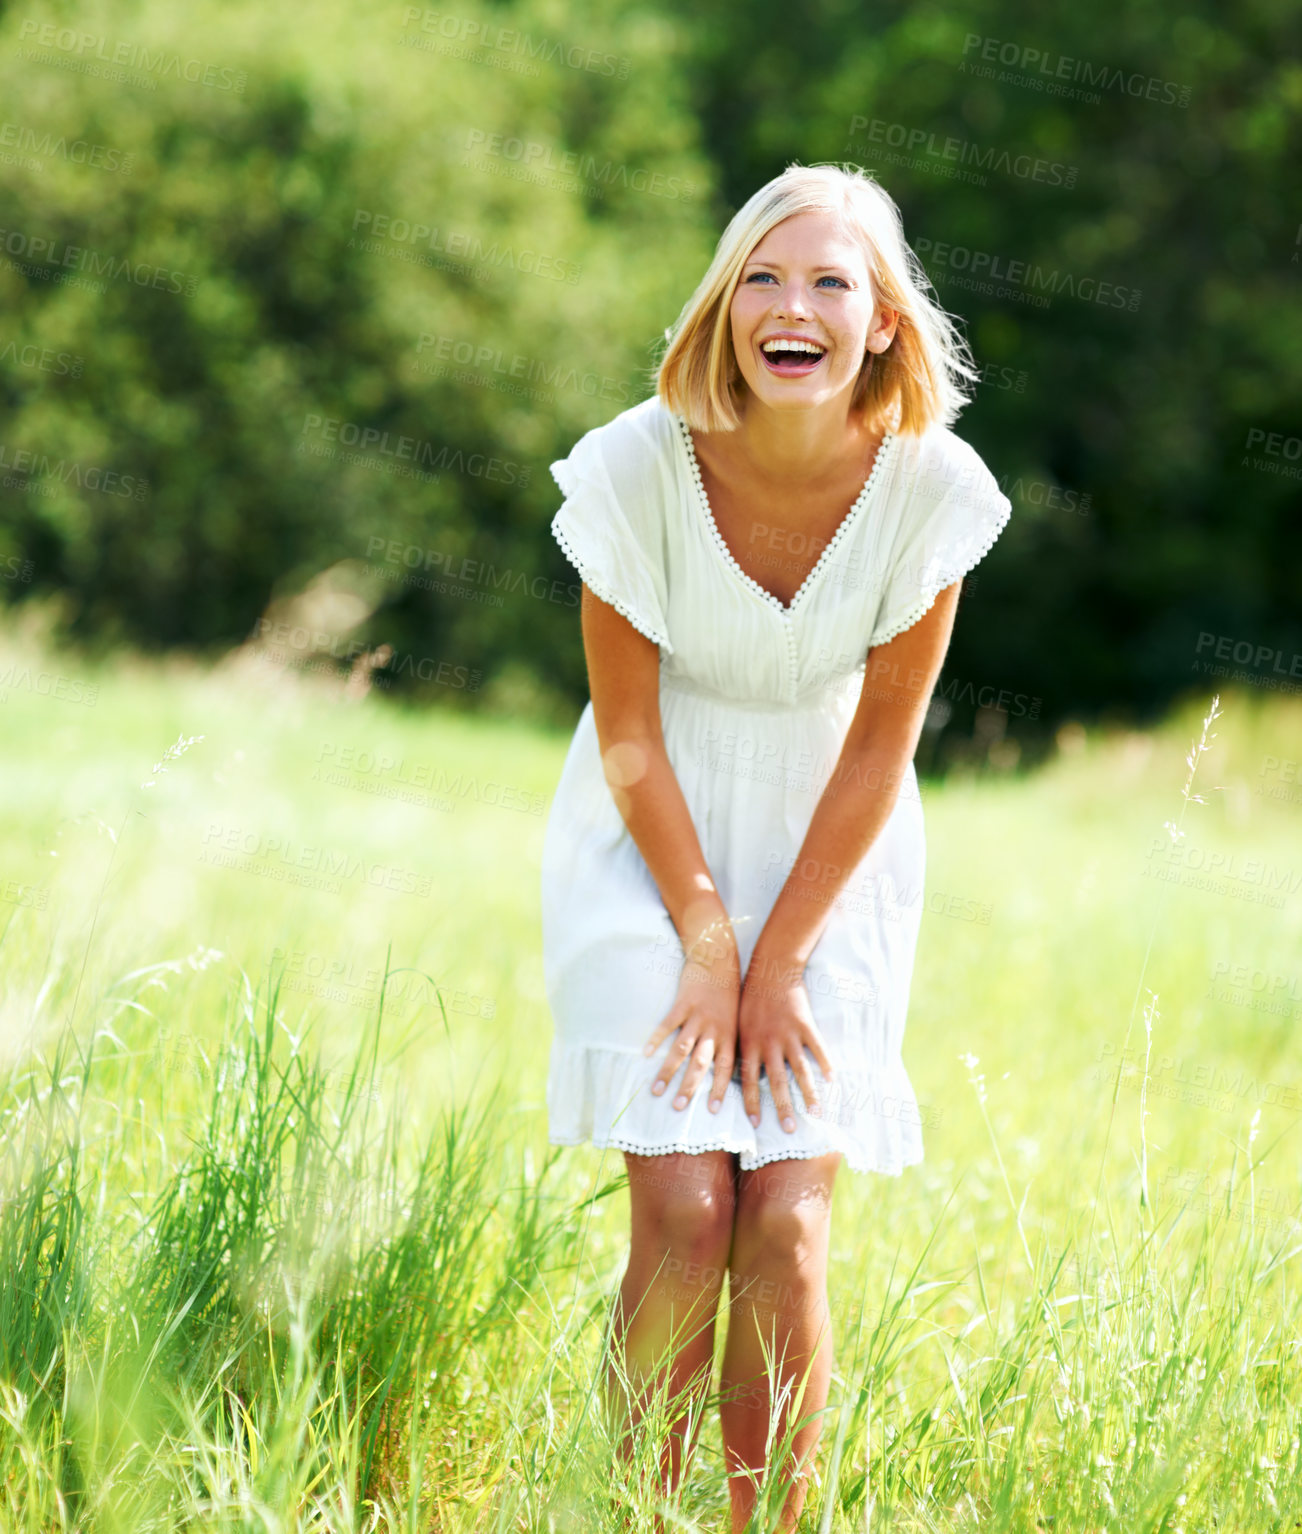 Buy stock photo Cute young woman laughing while standing in a field outdoors